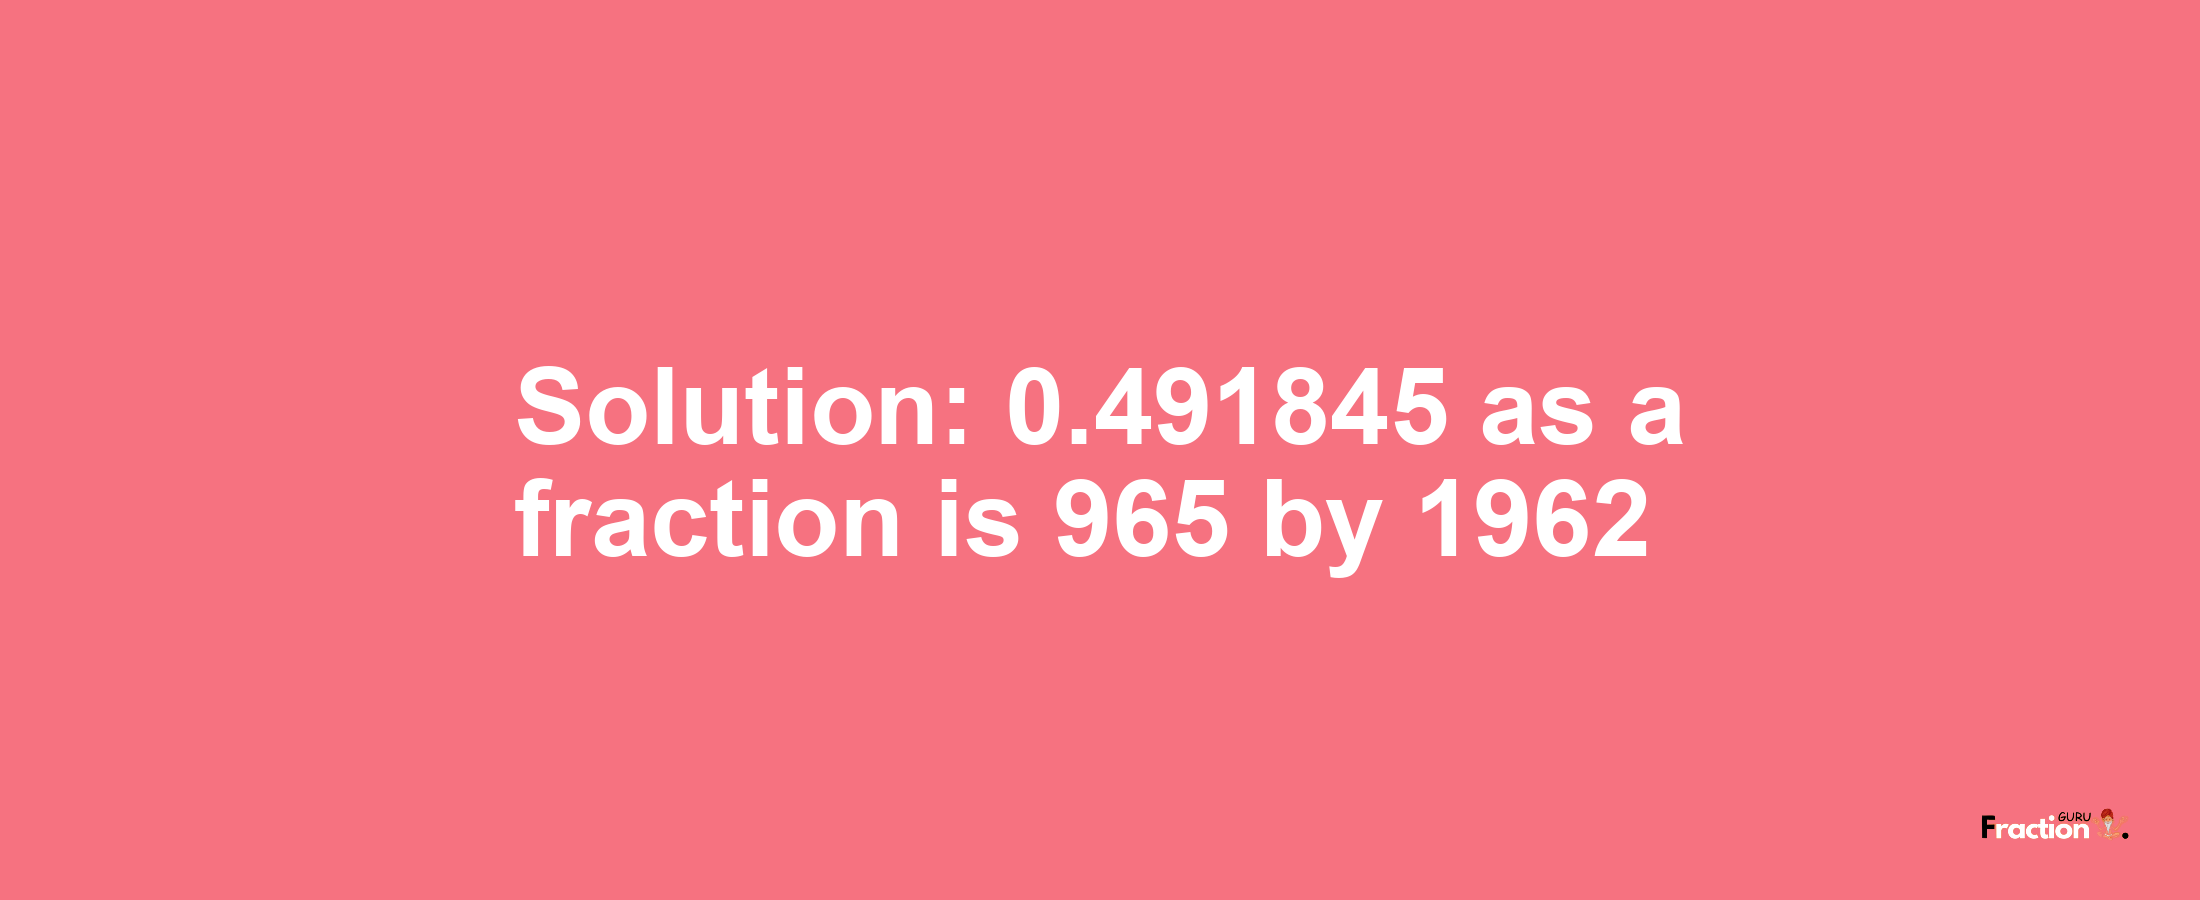 Solution:0.491845 as a fraction is 965/1962